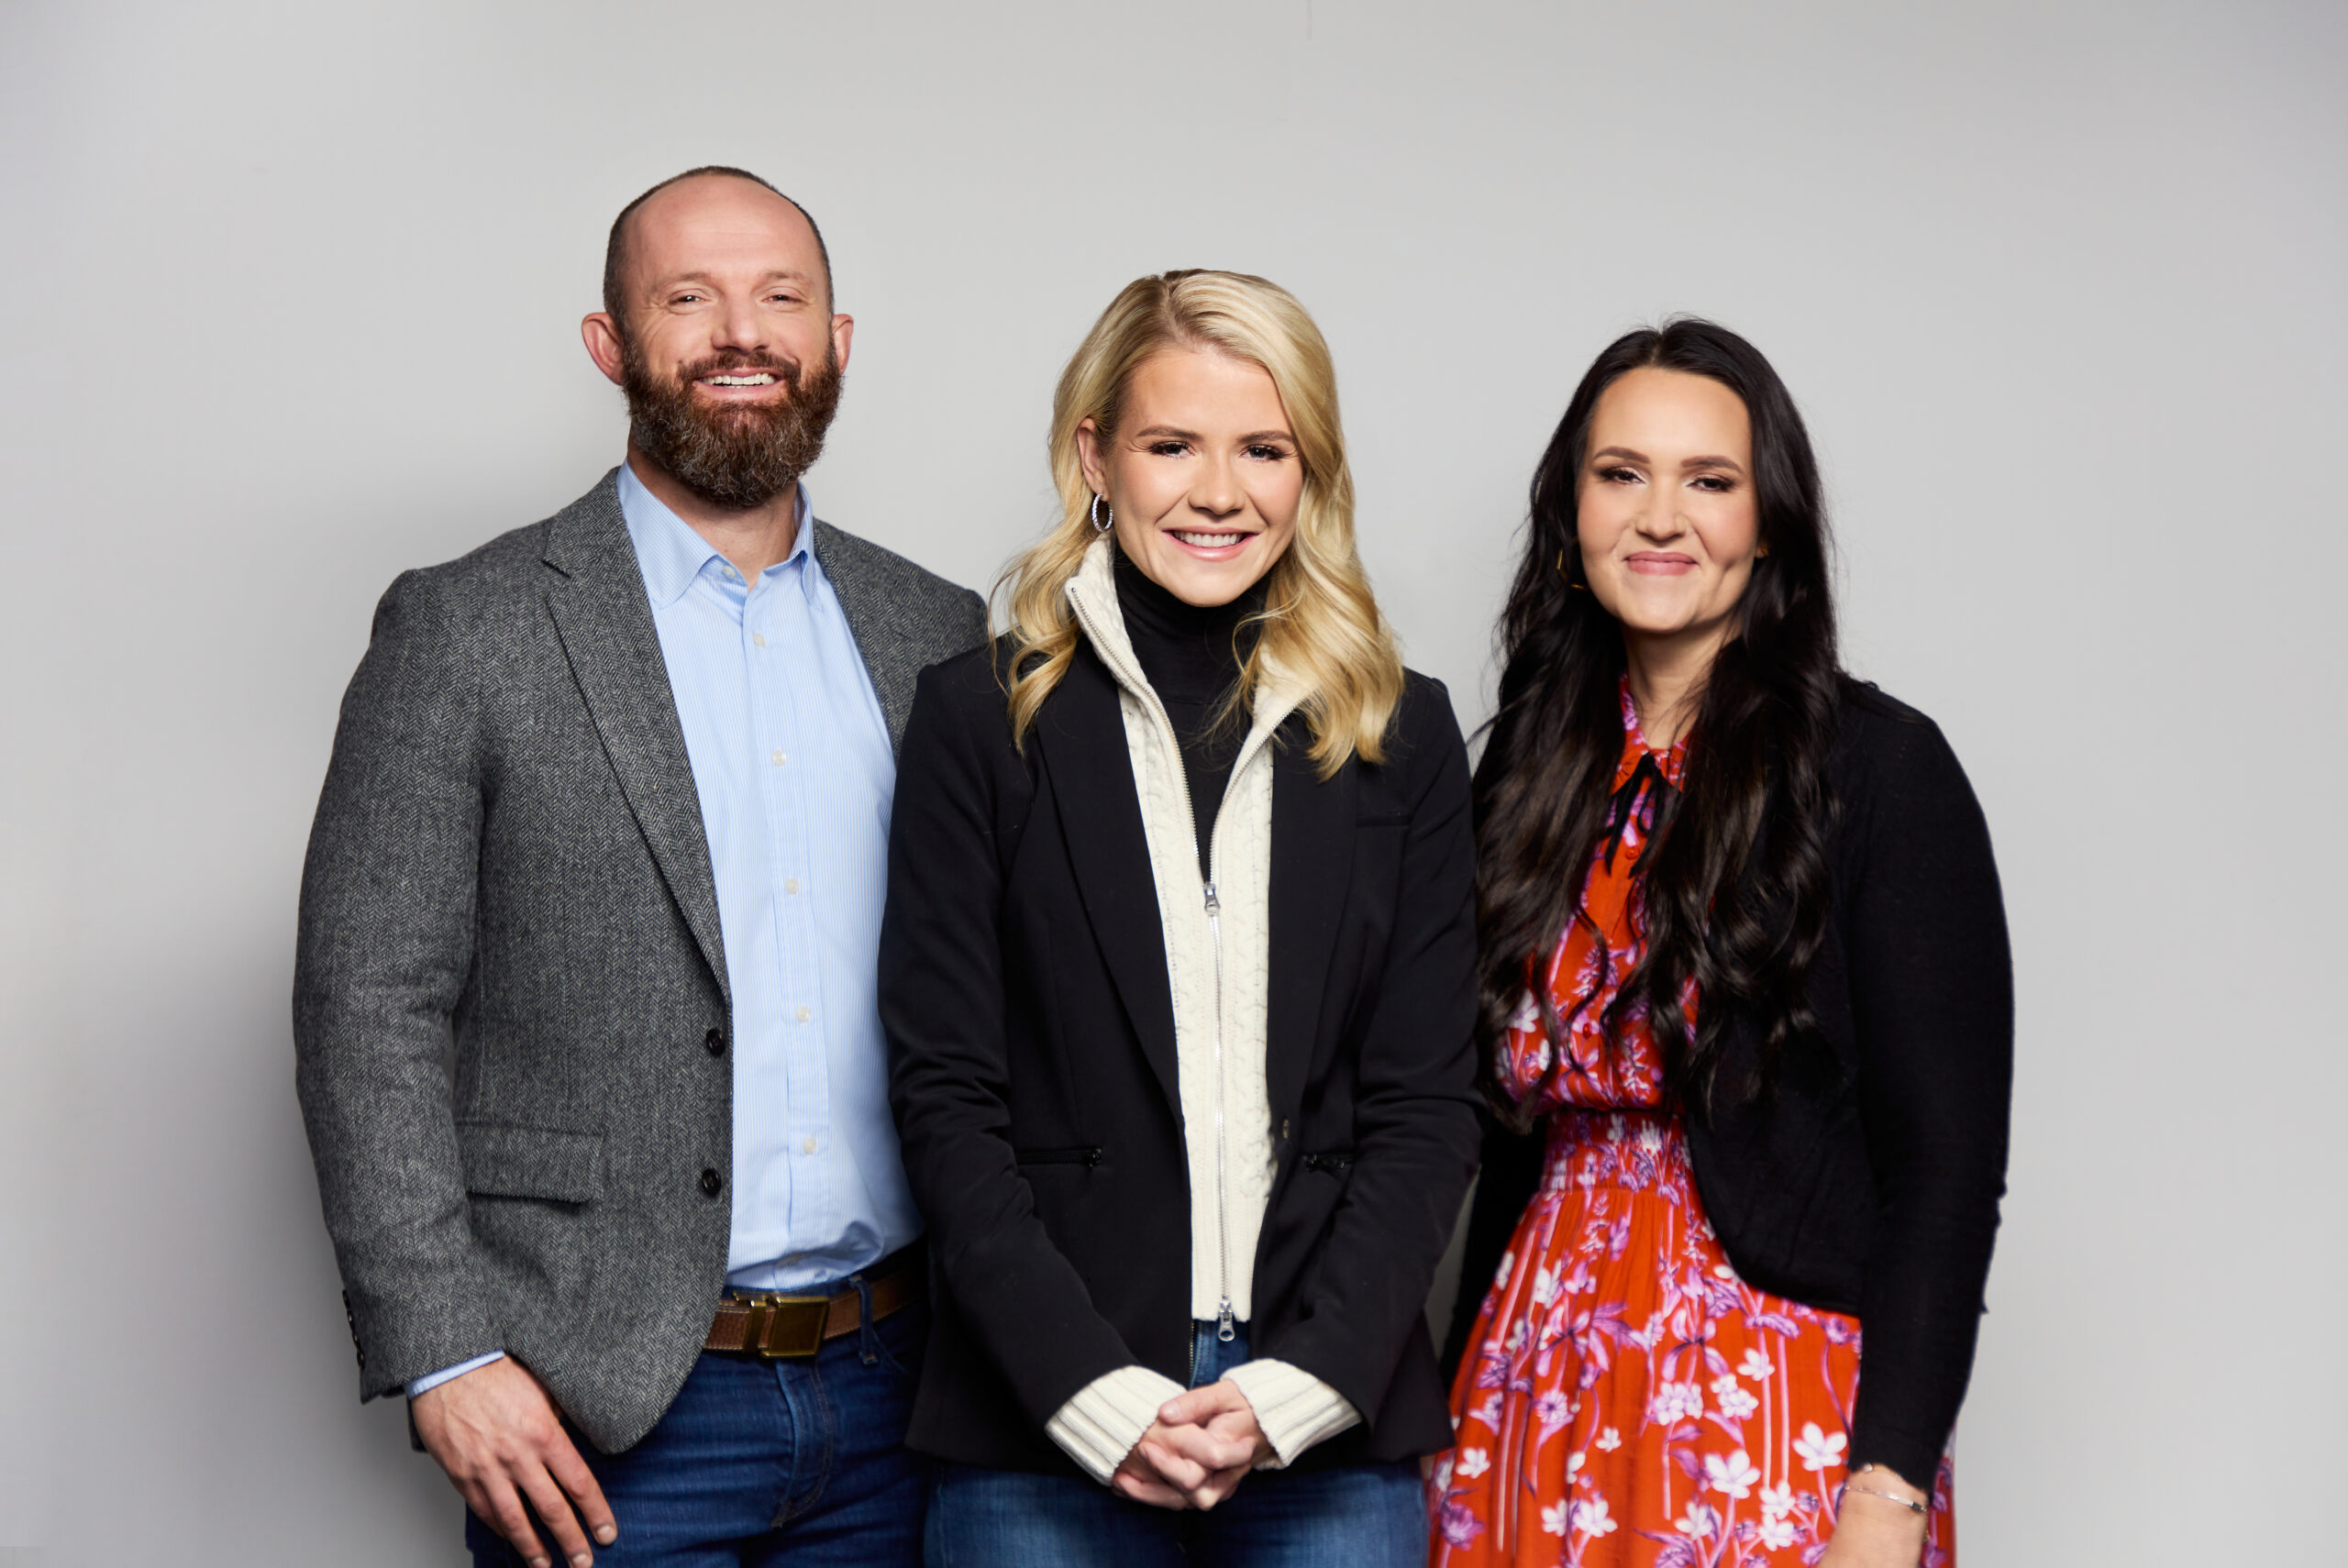 In this edition of the Founder Series, Elizabeth Smart shares how she created her foundation and changed the way survivors are seen.